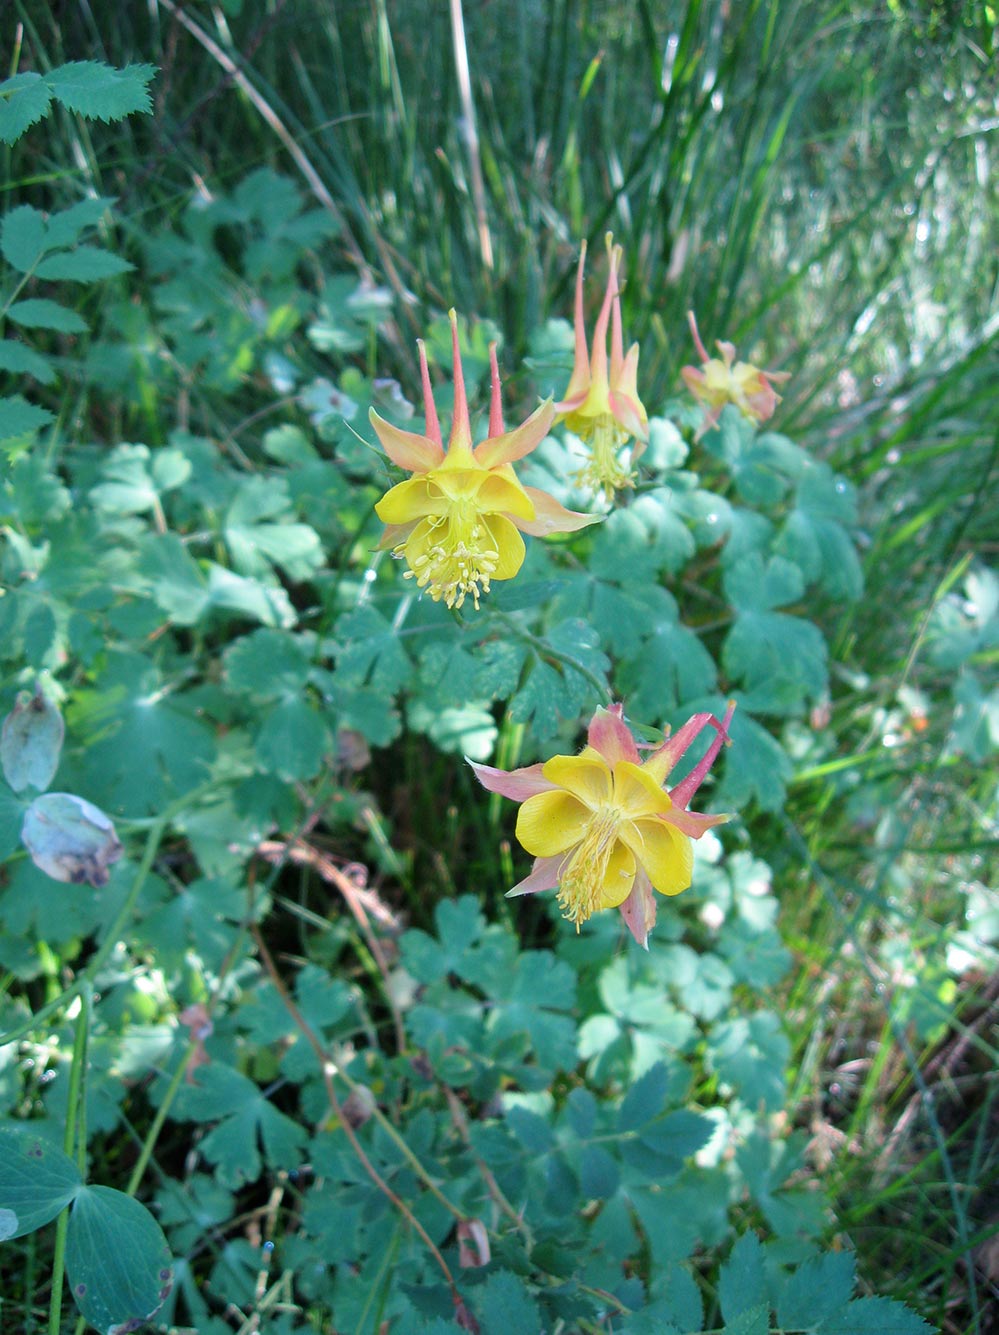 Yellow colombine blooming on a leafy green backdrop